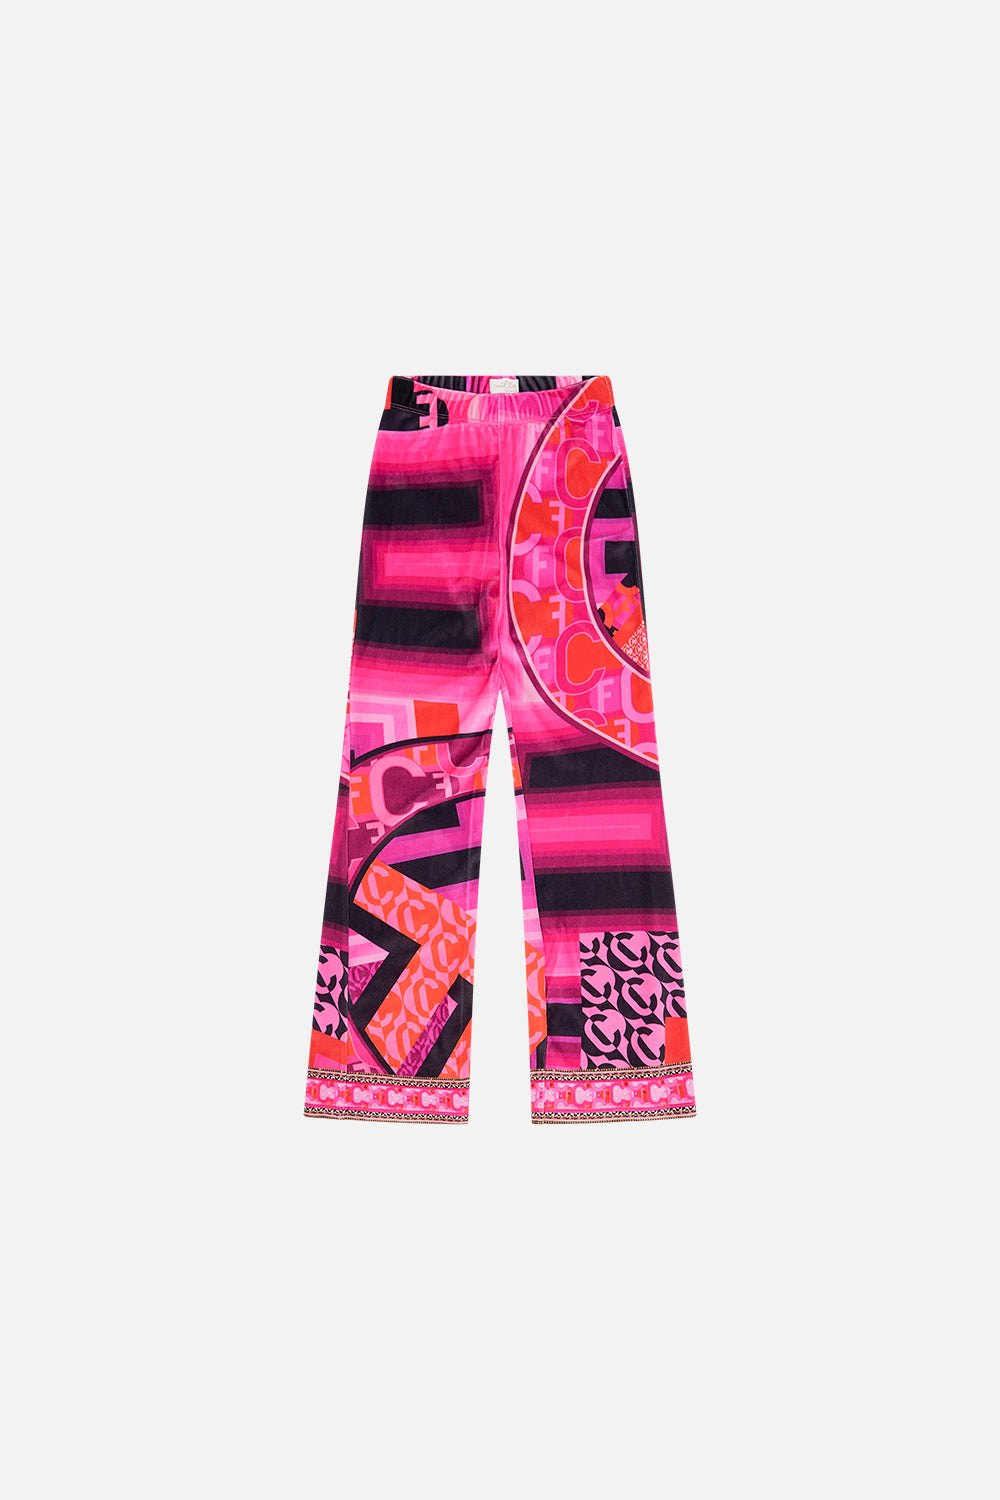 Product view of MILLA BY CAMILLA pink kids leggings in Ciao Palazzo print